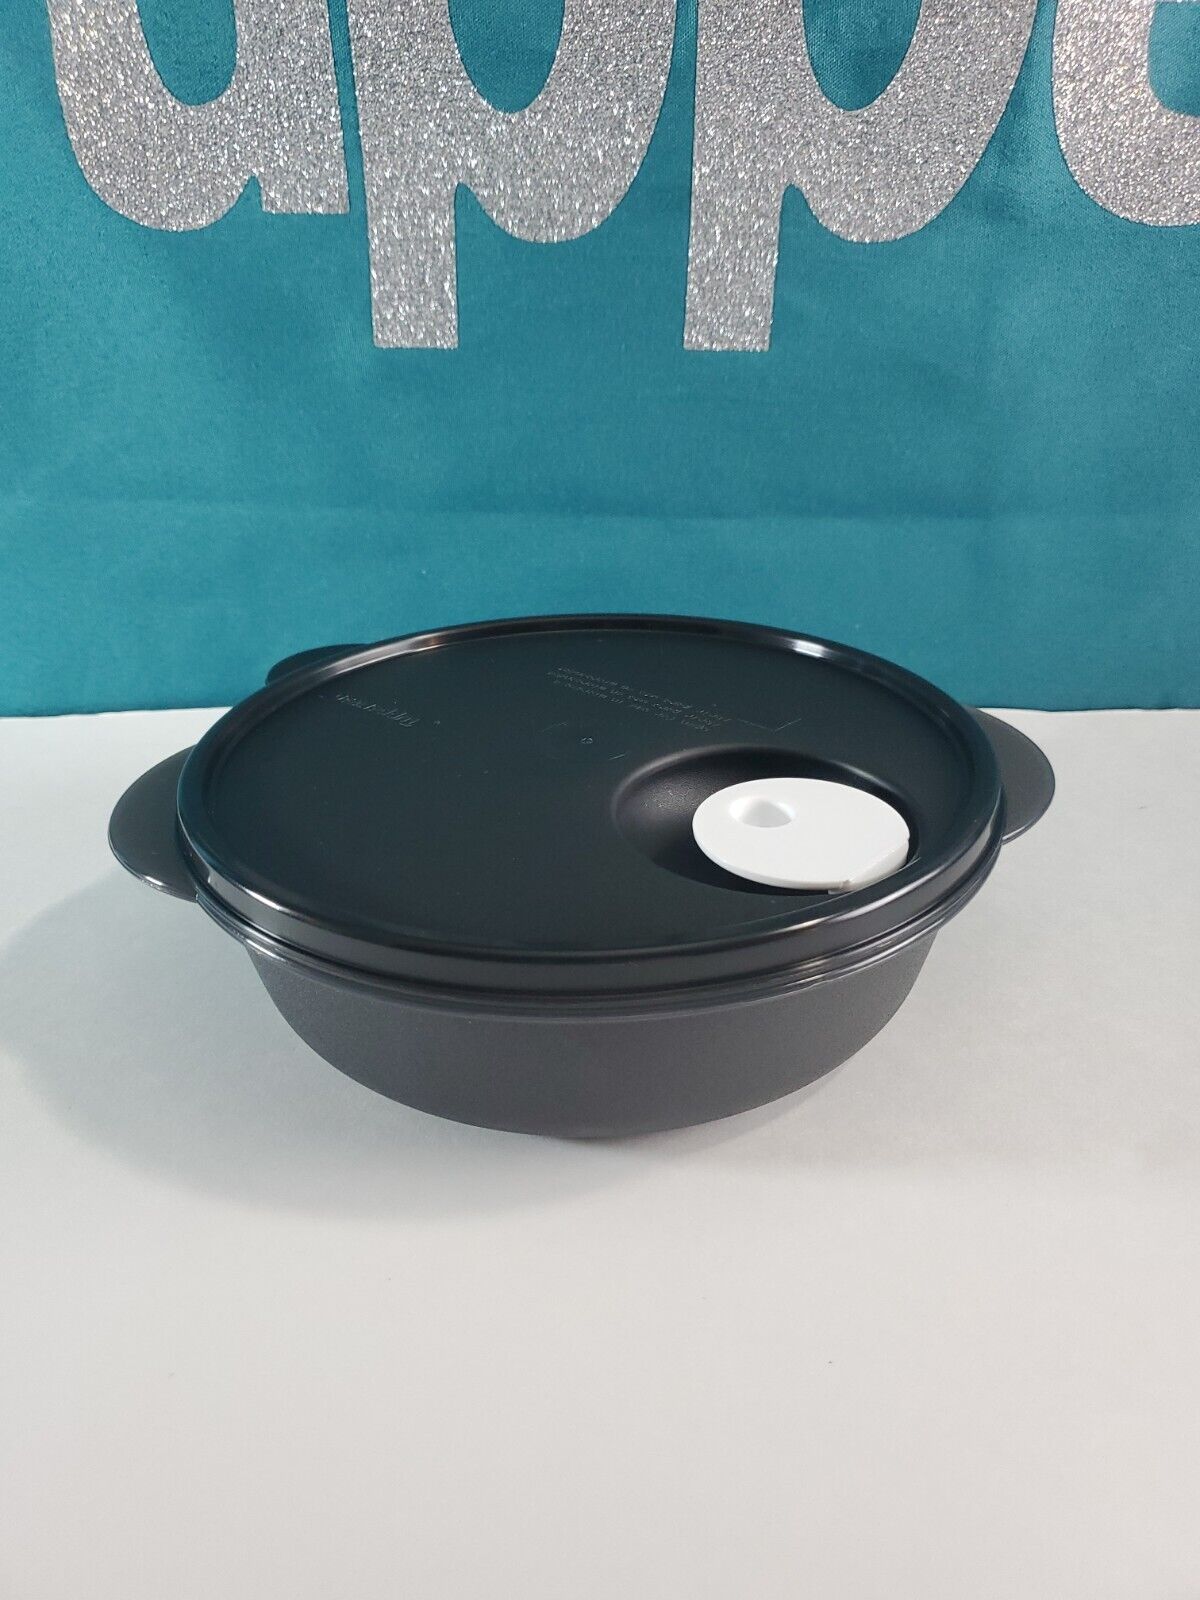 Tupperware Crystalwave Microwave Divided Dish 825ml/ 3.25 cup Black New Sale